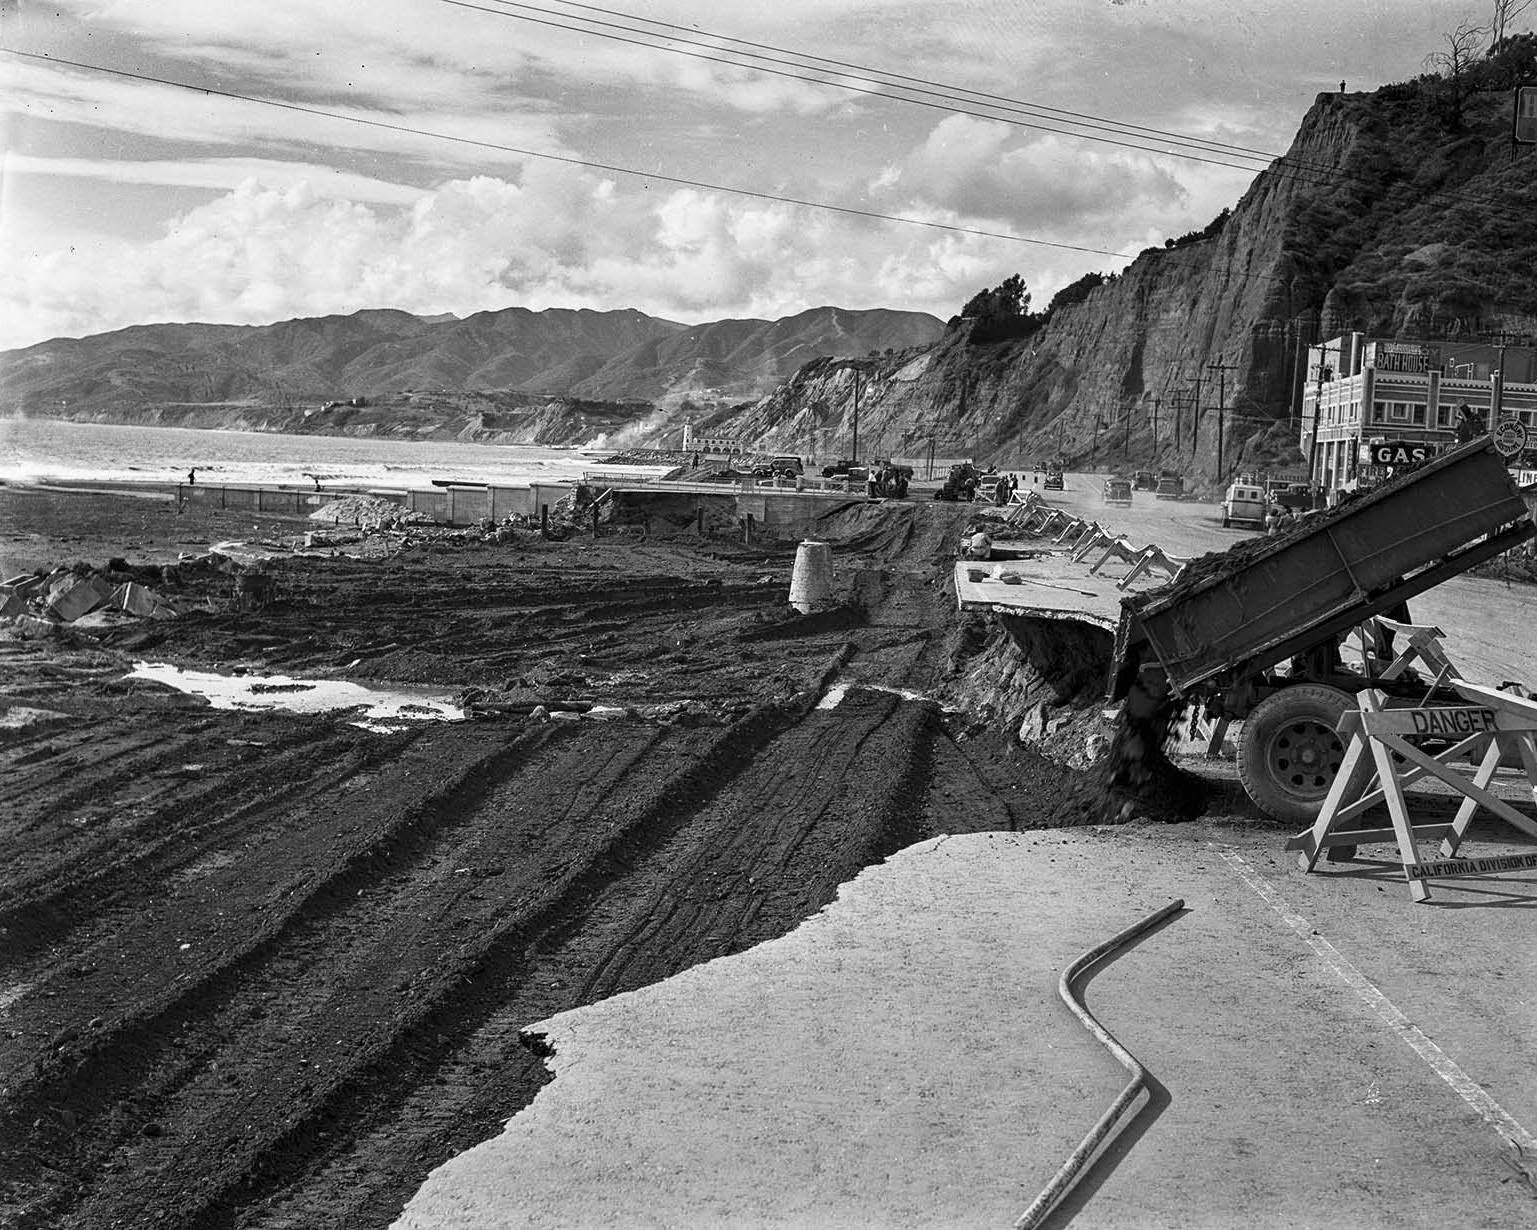 A portion of Roosevelt Highway (now Pacific Coast Highway) at Santa Monica Canyon is repaired after heavy rains, 1938